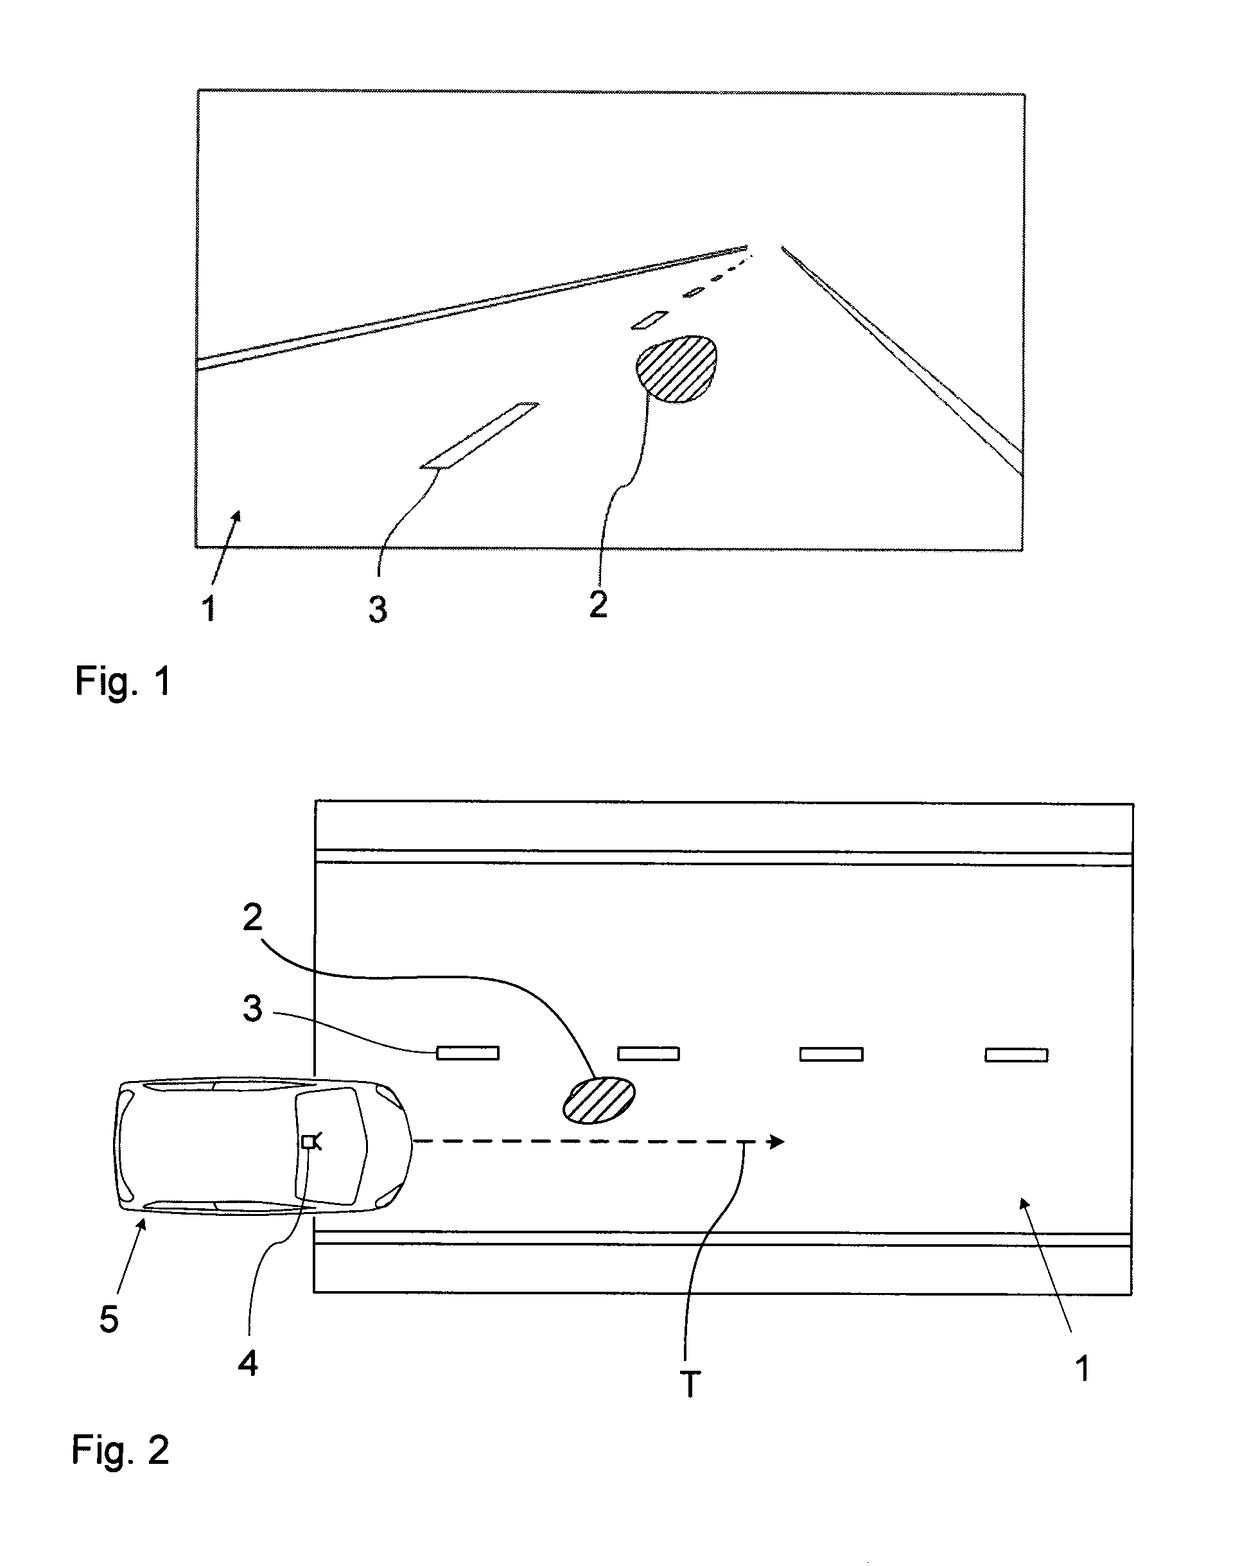 Method for determining a state of a pavement from surroundings sensor data